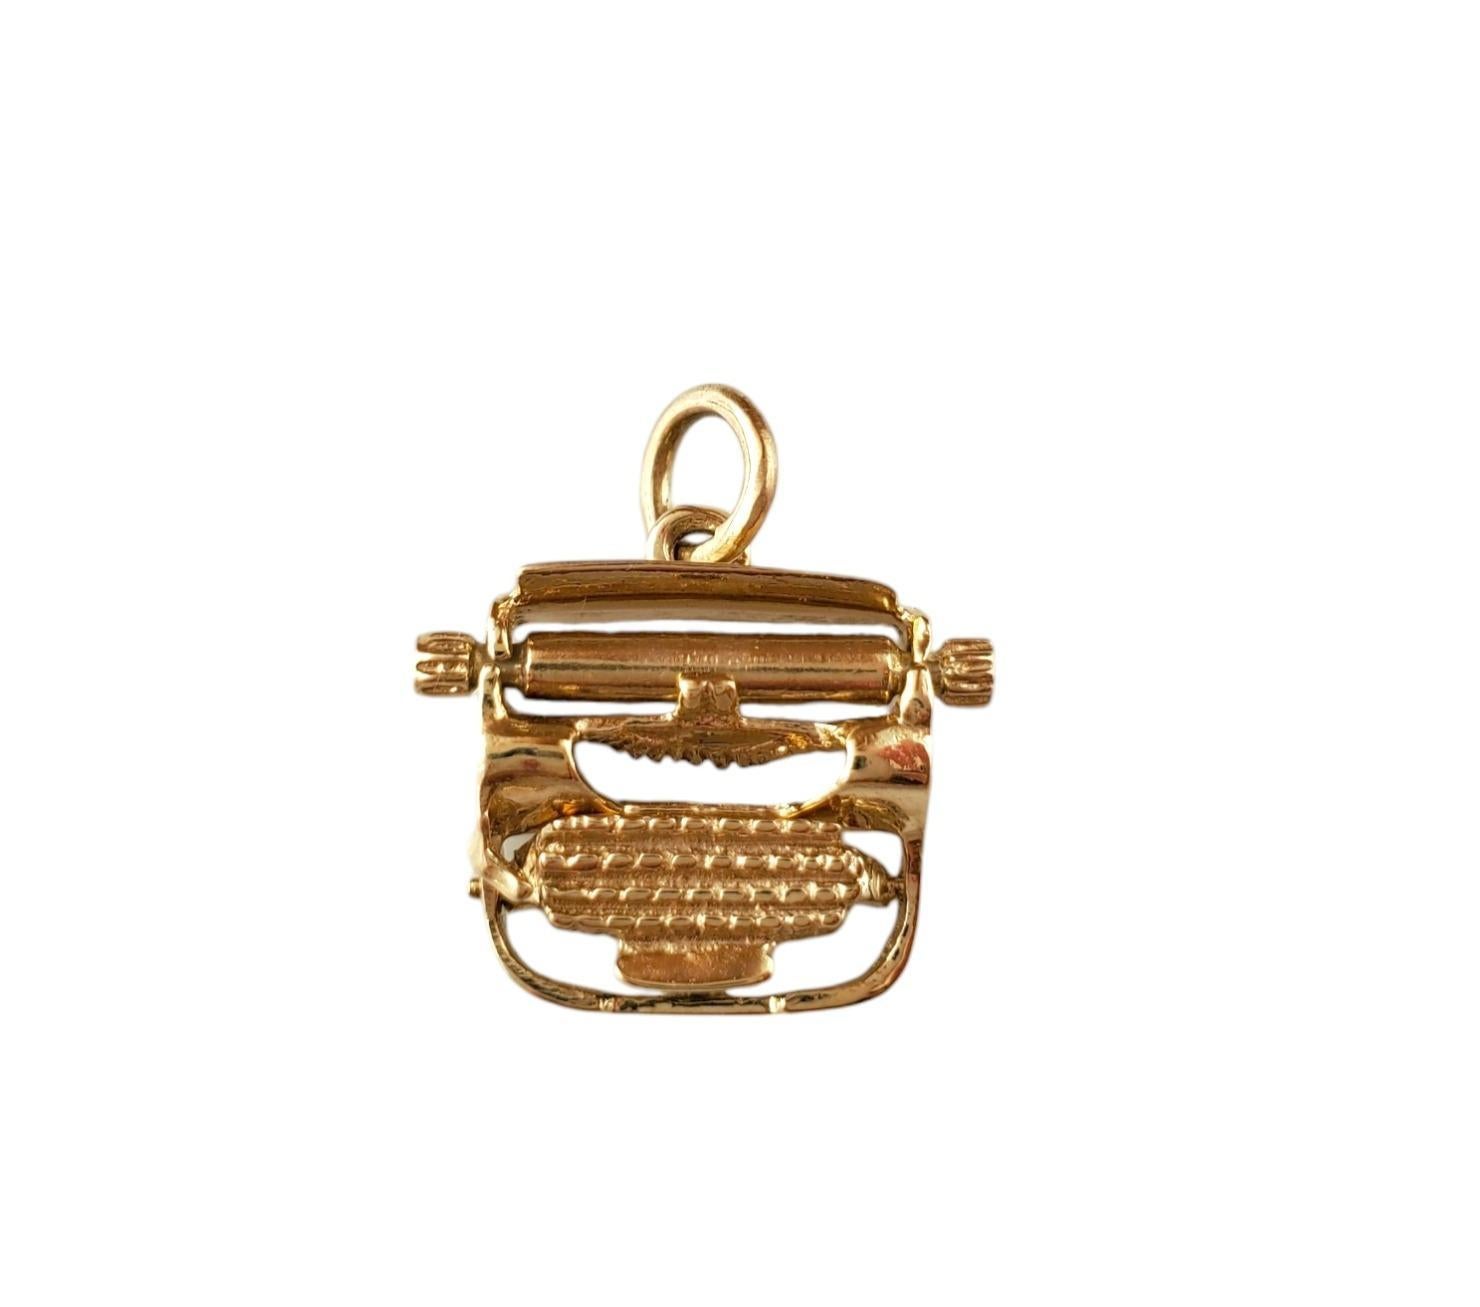 Vintage 14K Yellow Gold Typewriter Charm -

This vintage charm symbolizes the art of writing, and is crafted in intricately detailed 14K yellow gold    . 

Size: 18.44mm X 17.18mm

Weight: 1.8dwt/ 2.8g

Hallmark: 14K

Very good condition,